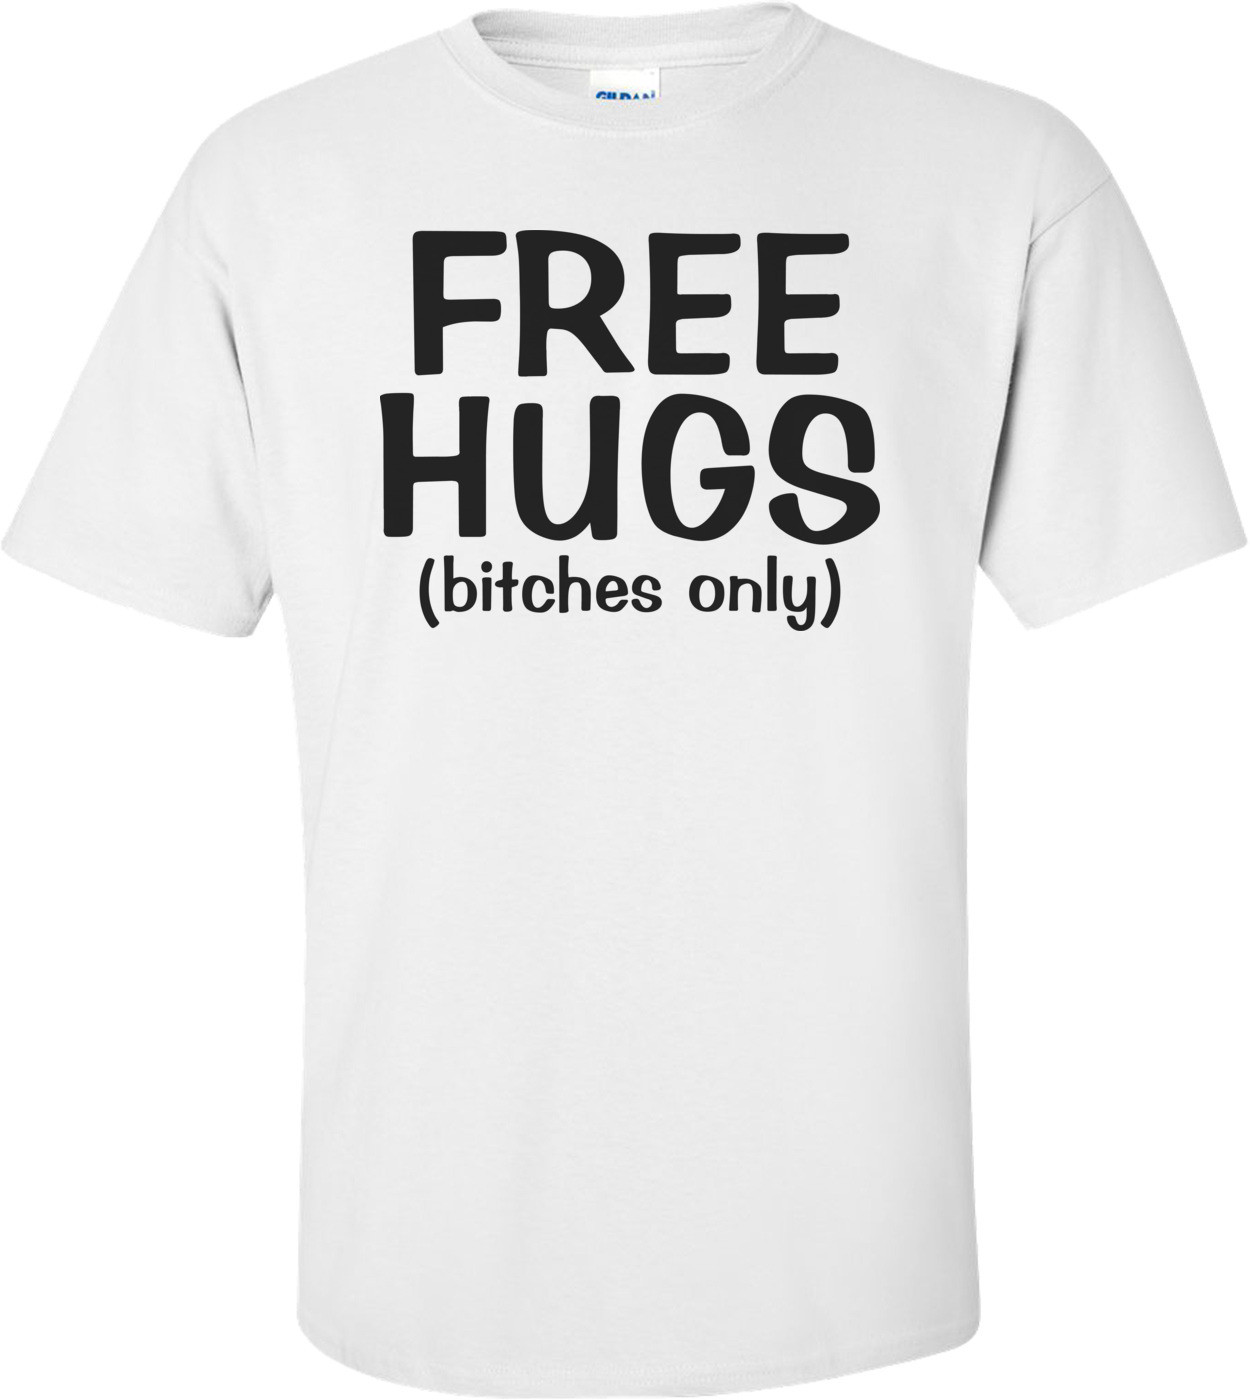 Free Hugs - Bitches Only Shirt